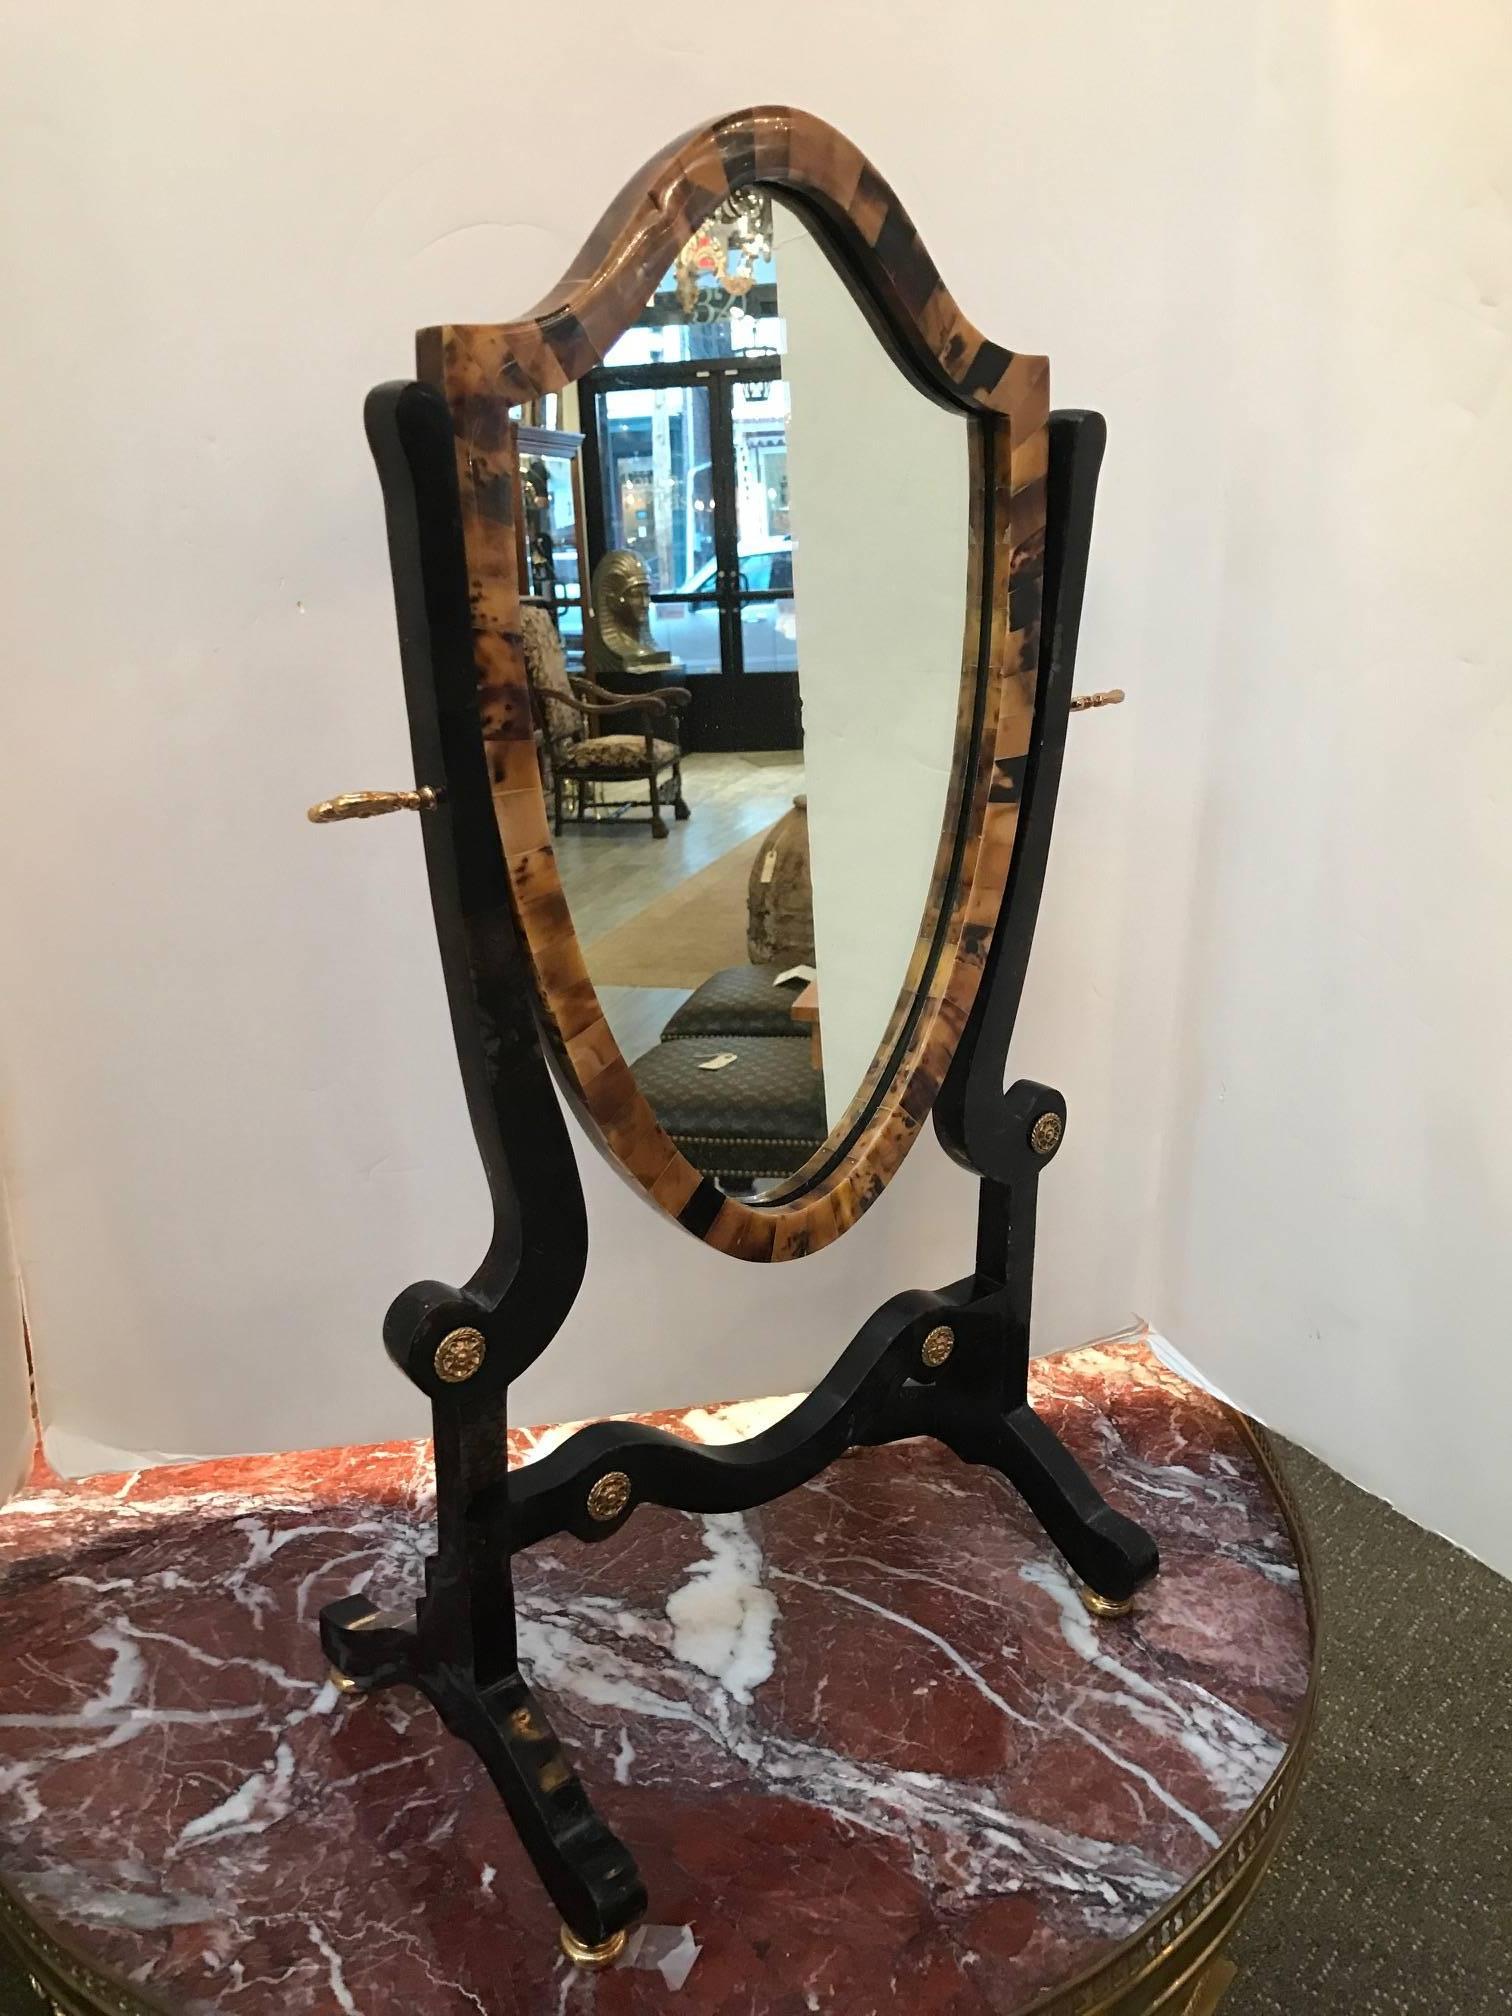 A tessellated stone and bronze-mounted standing vanity mirror. The Classic Hepplewhite style with a modern tessellated stone surface. The mirror is framed with a lighter stone in a tortoise shell color; the frame is a dark, almost black stone with